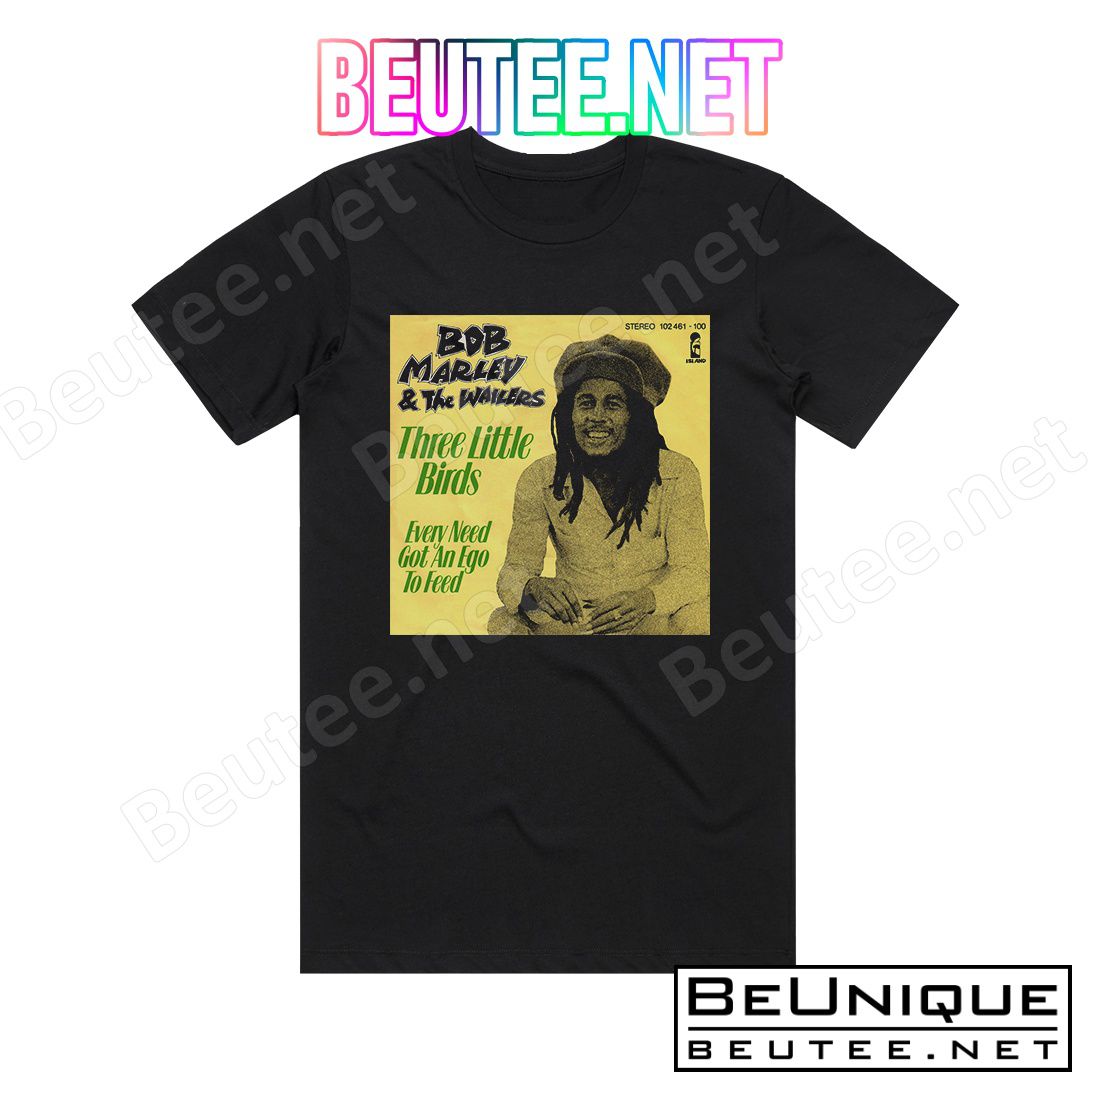 Bob Marley and The Wailers Three Little Birds Album Cover T-Shirt